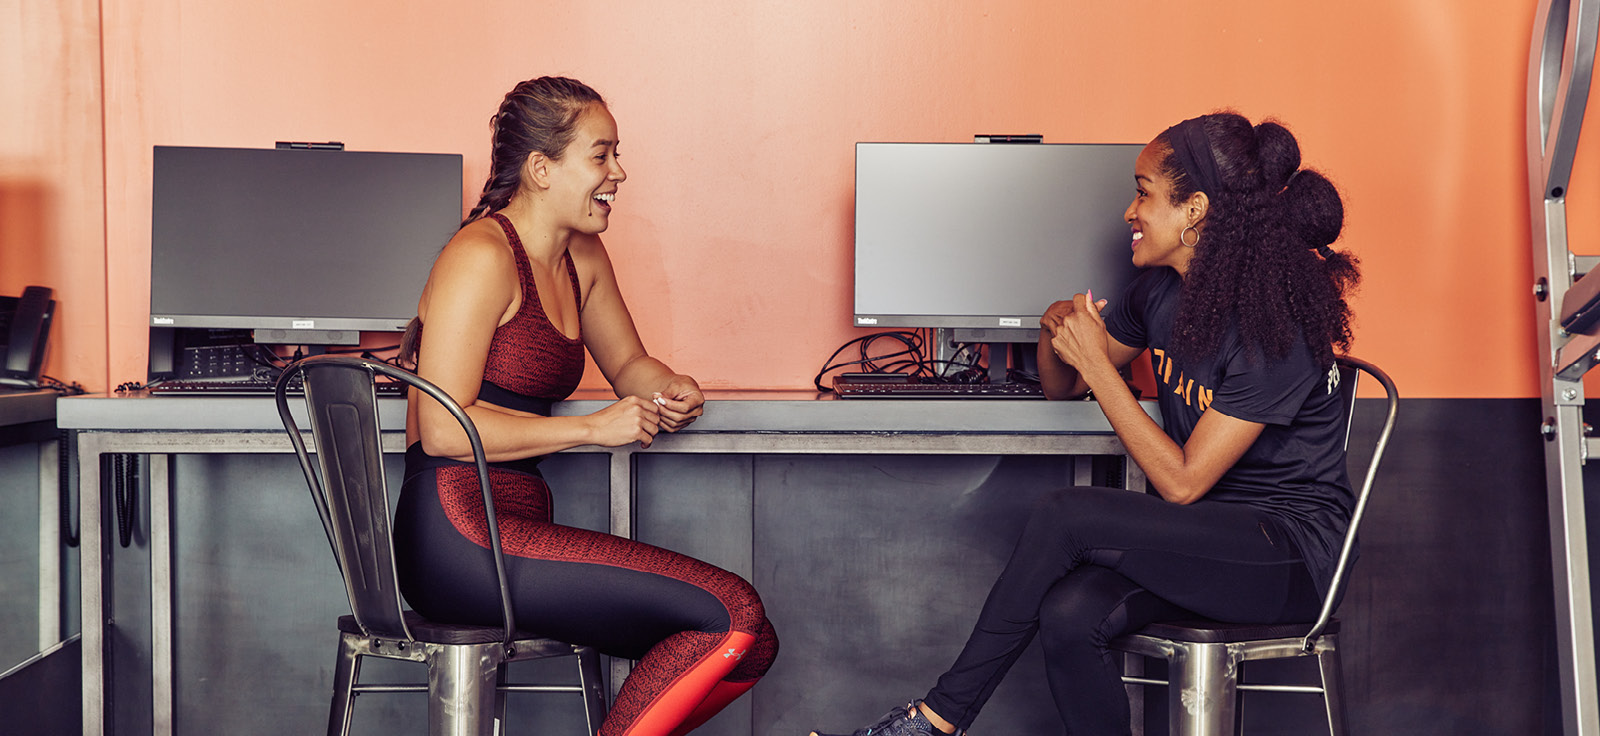 Our 12 Best Group Fitness Classes: The Secret to Supercharging